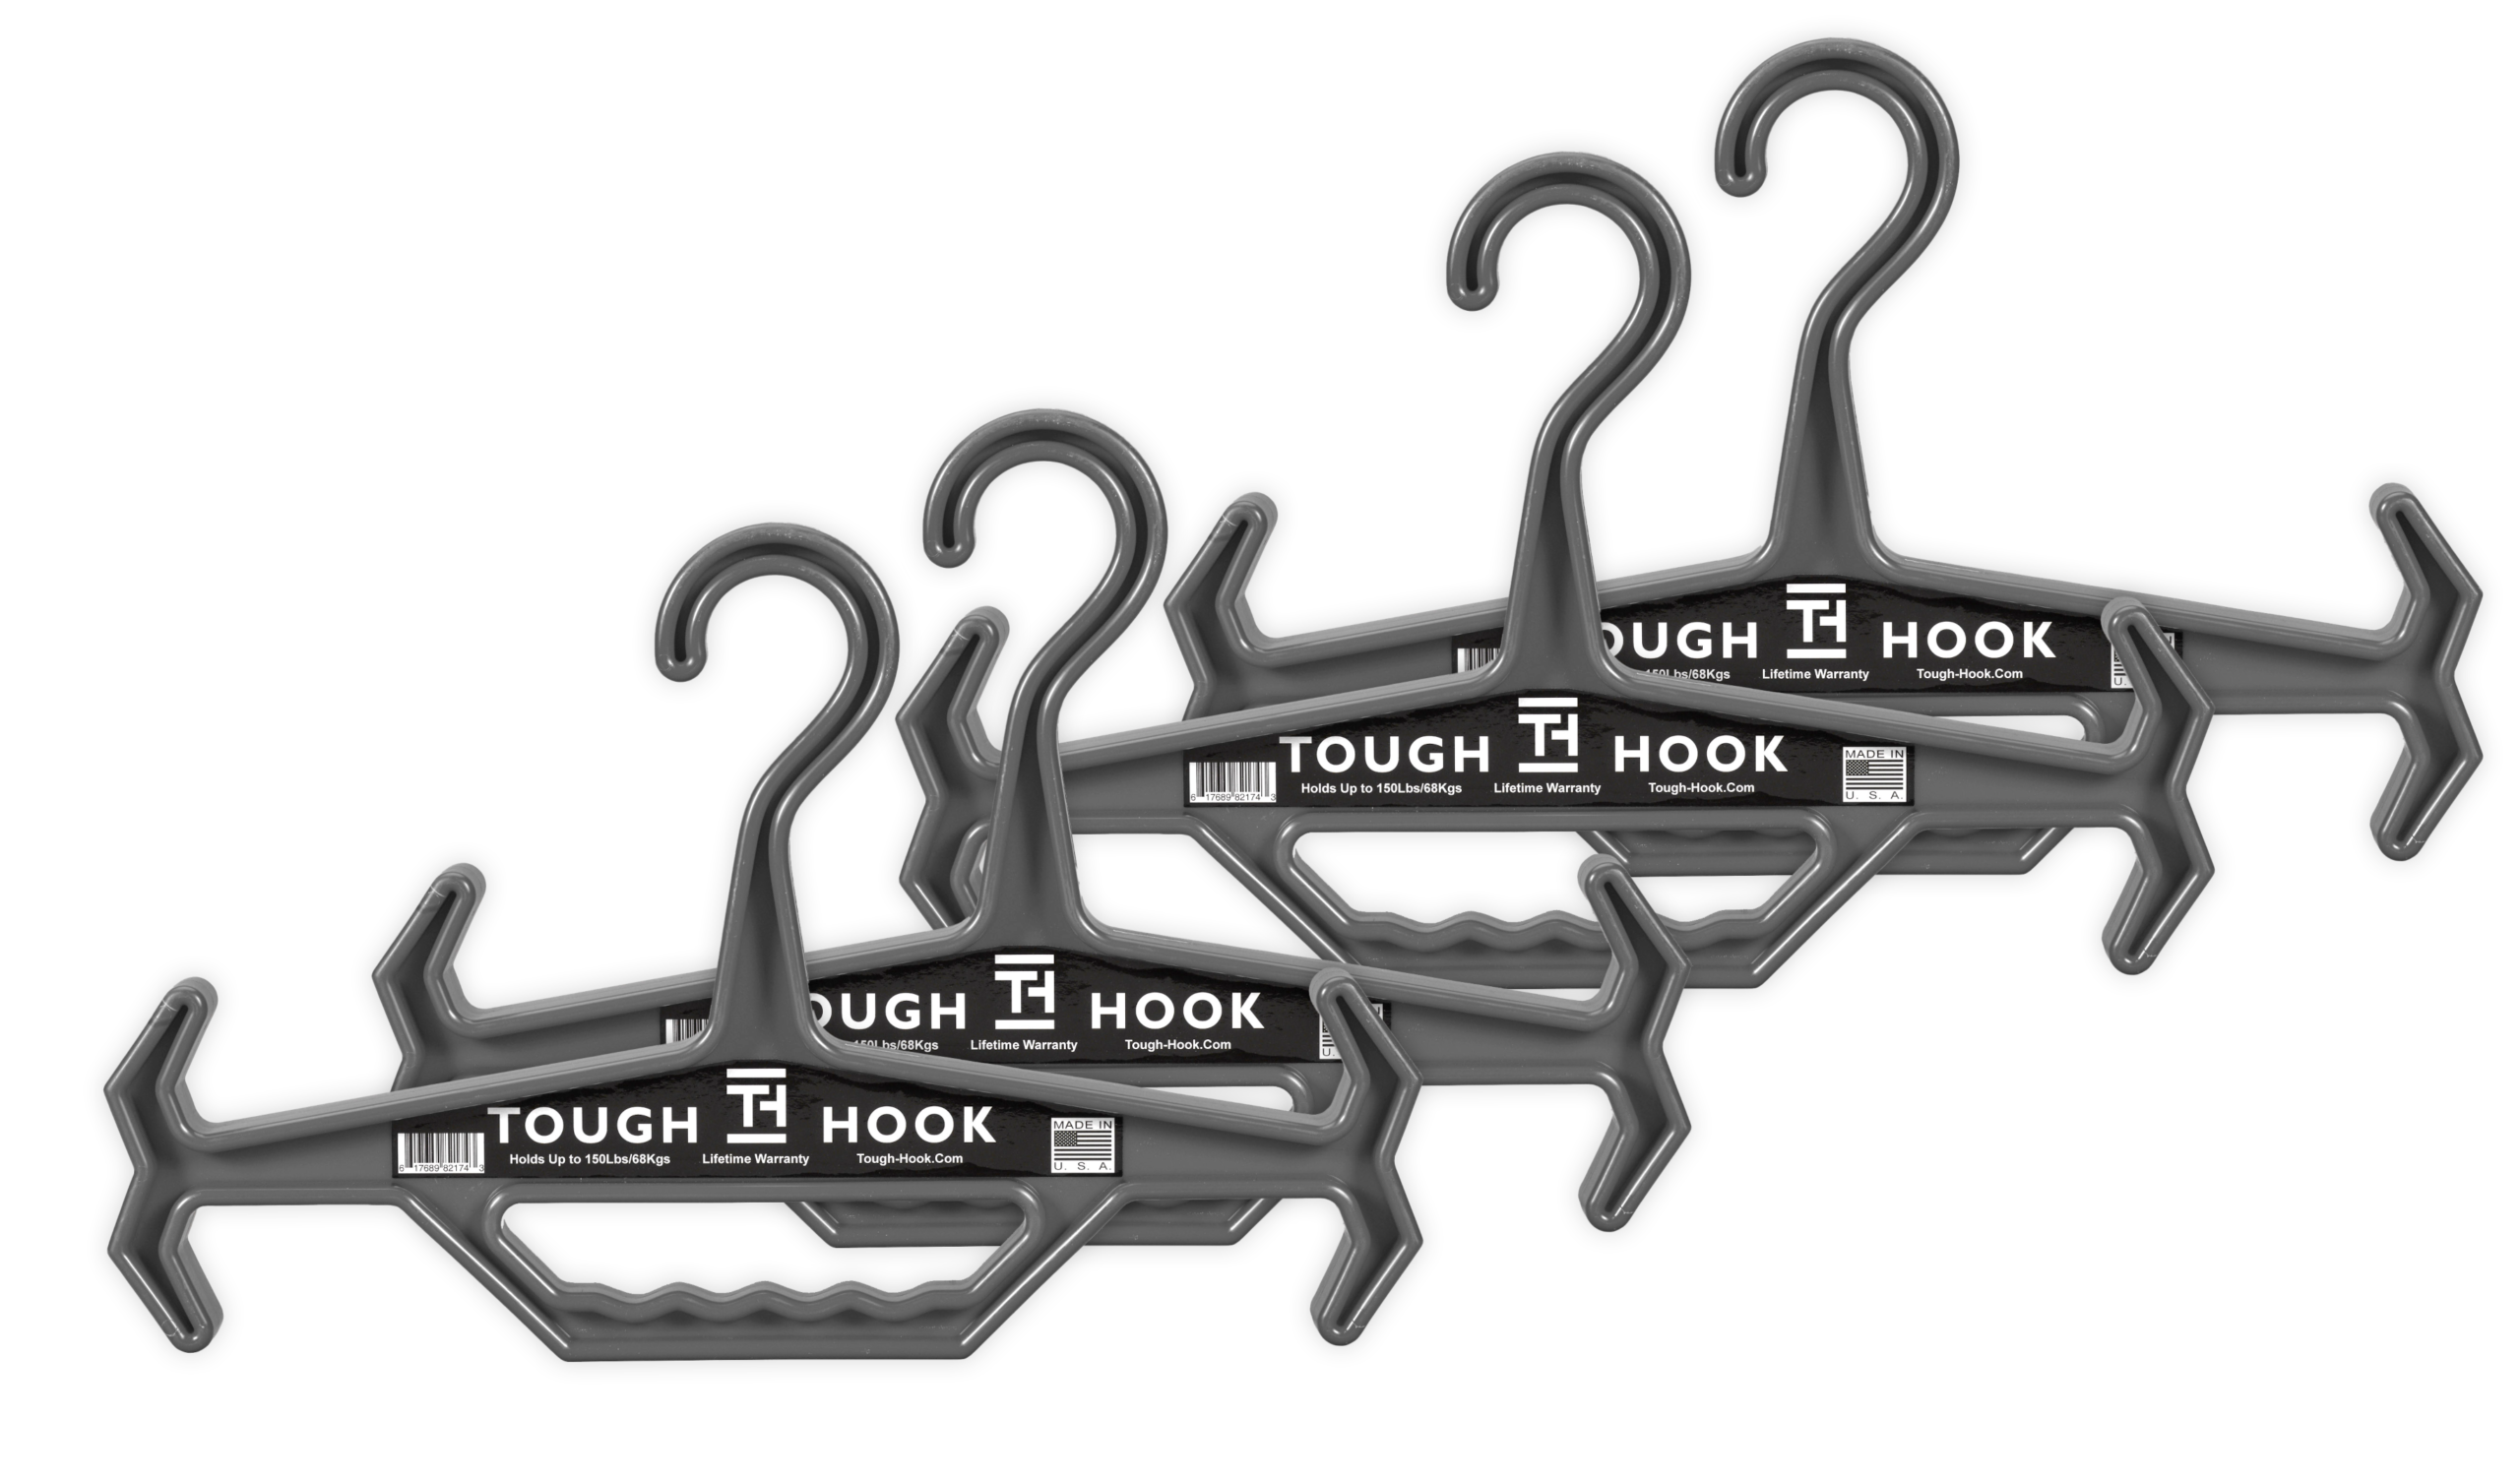 NEW Tough Hook Tactical Equipment Black FREE SHIPPING 